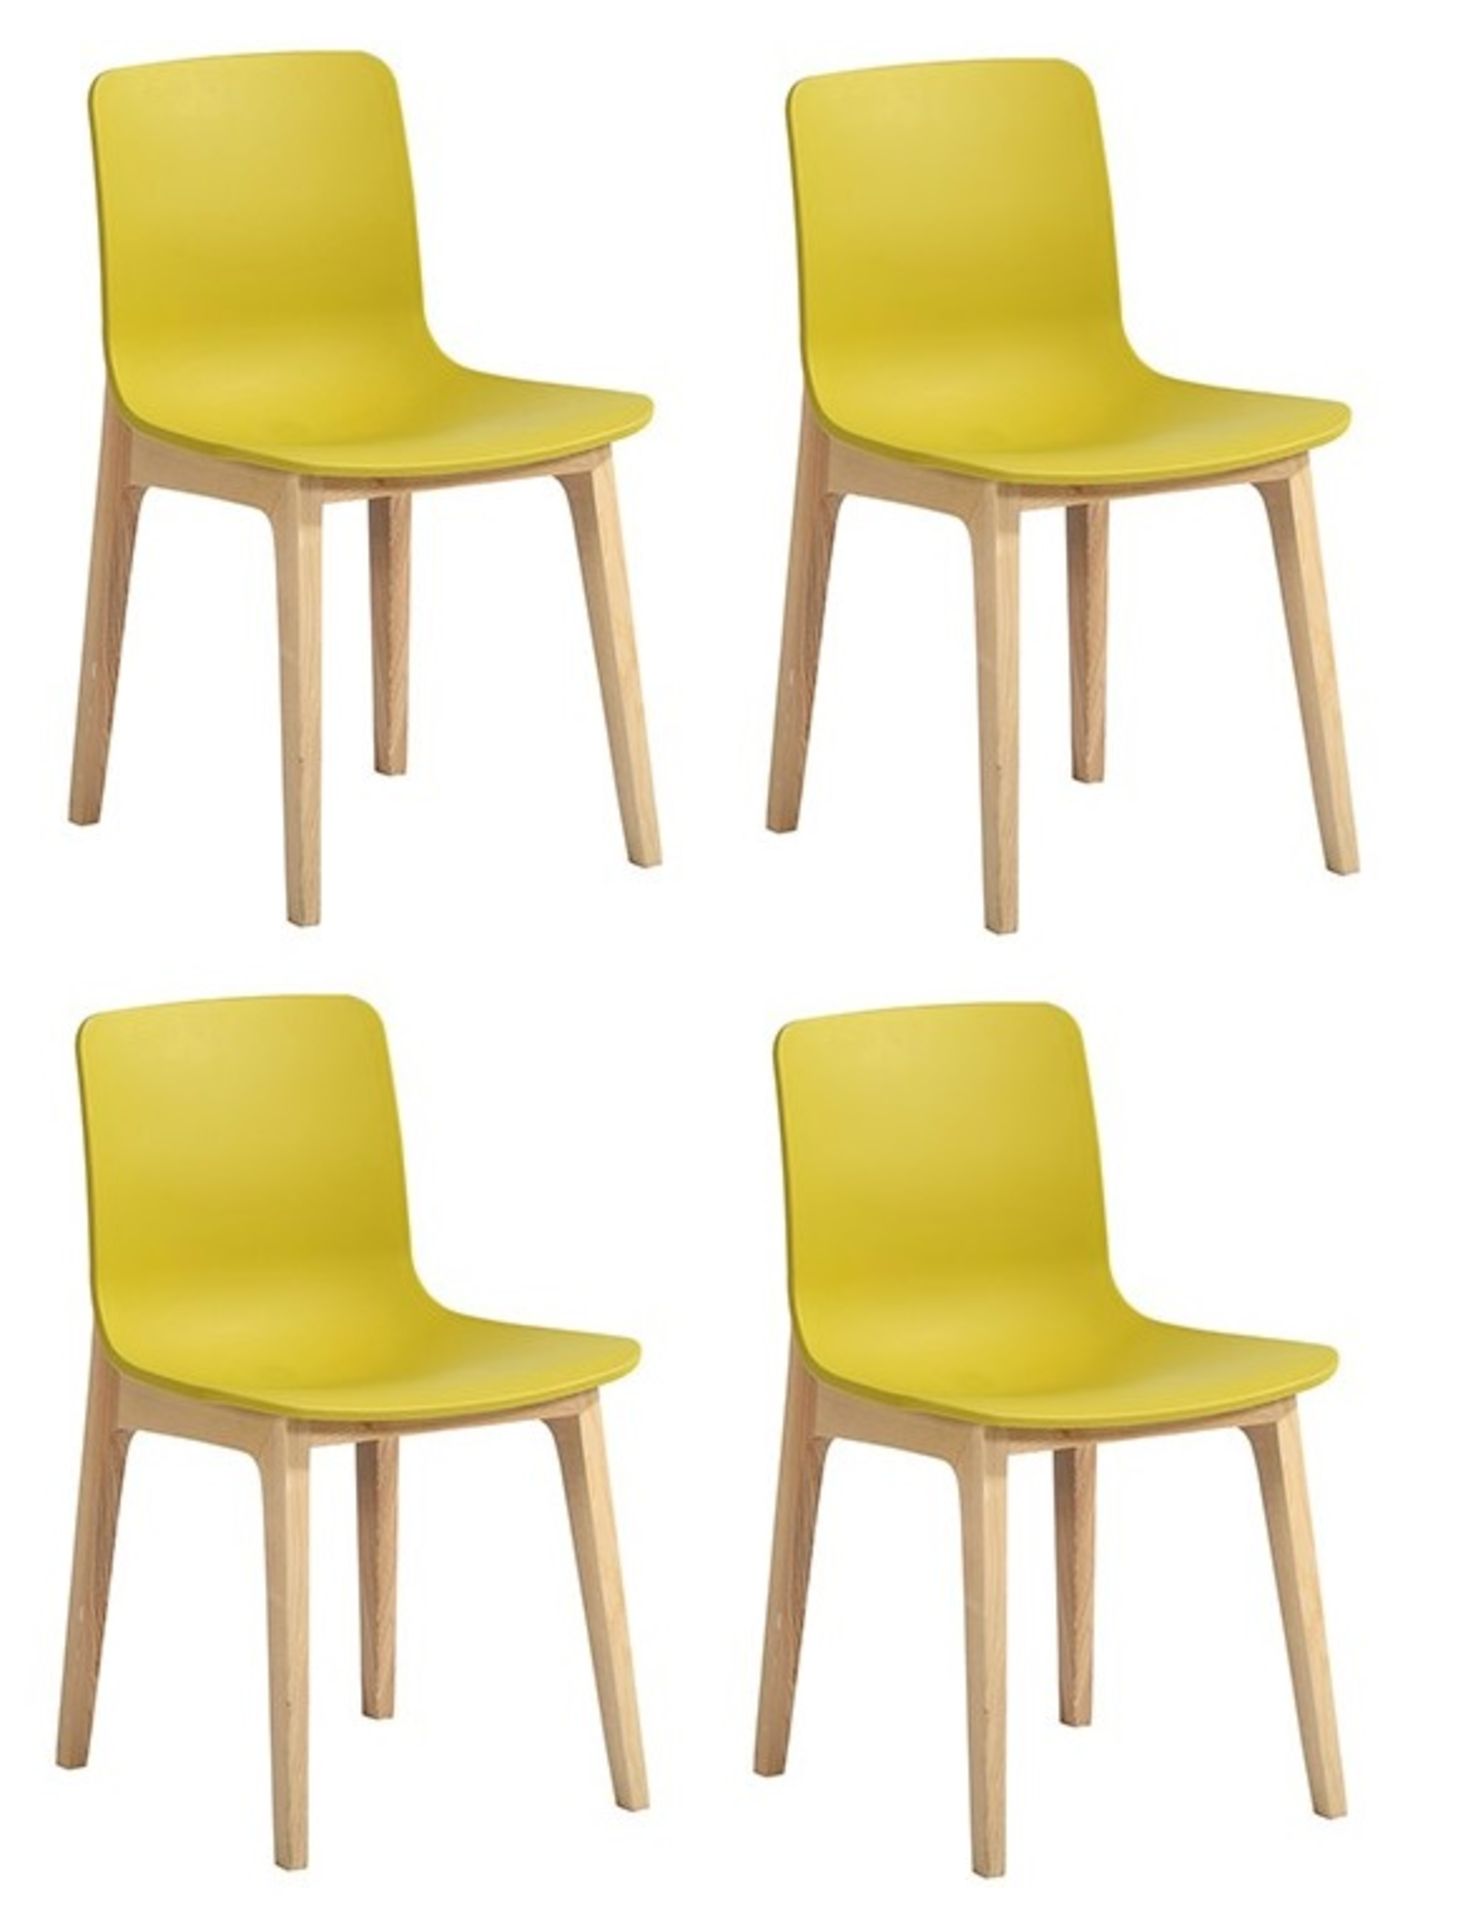 Set of 4 x Swift DC-782W Dining Chairs With Chartreuse Yellow ABS Seats and Dark Wood Bases